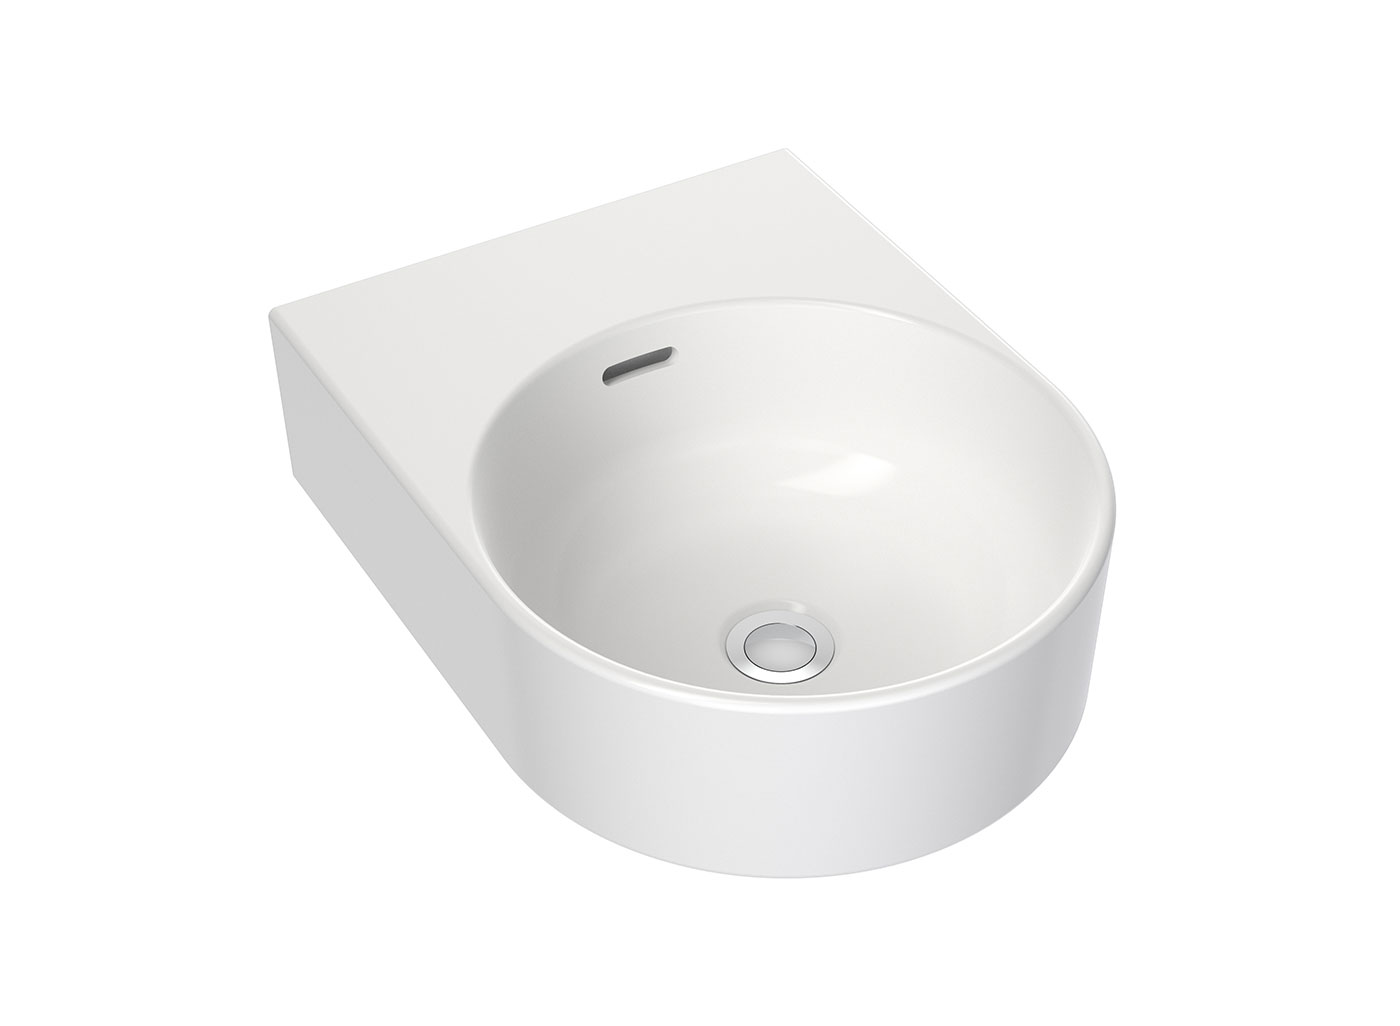 Trying to make your small bathroom look big? Check out Clark's wall basins.